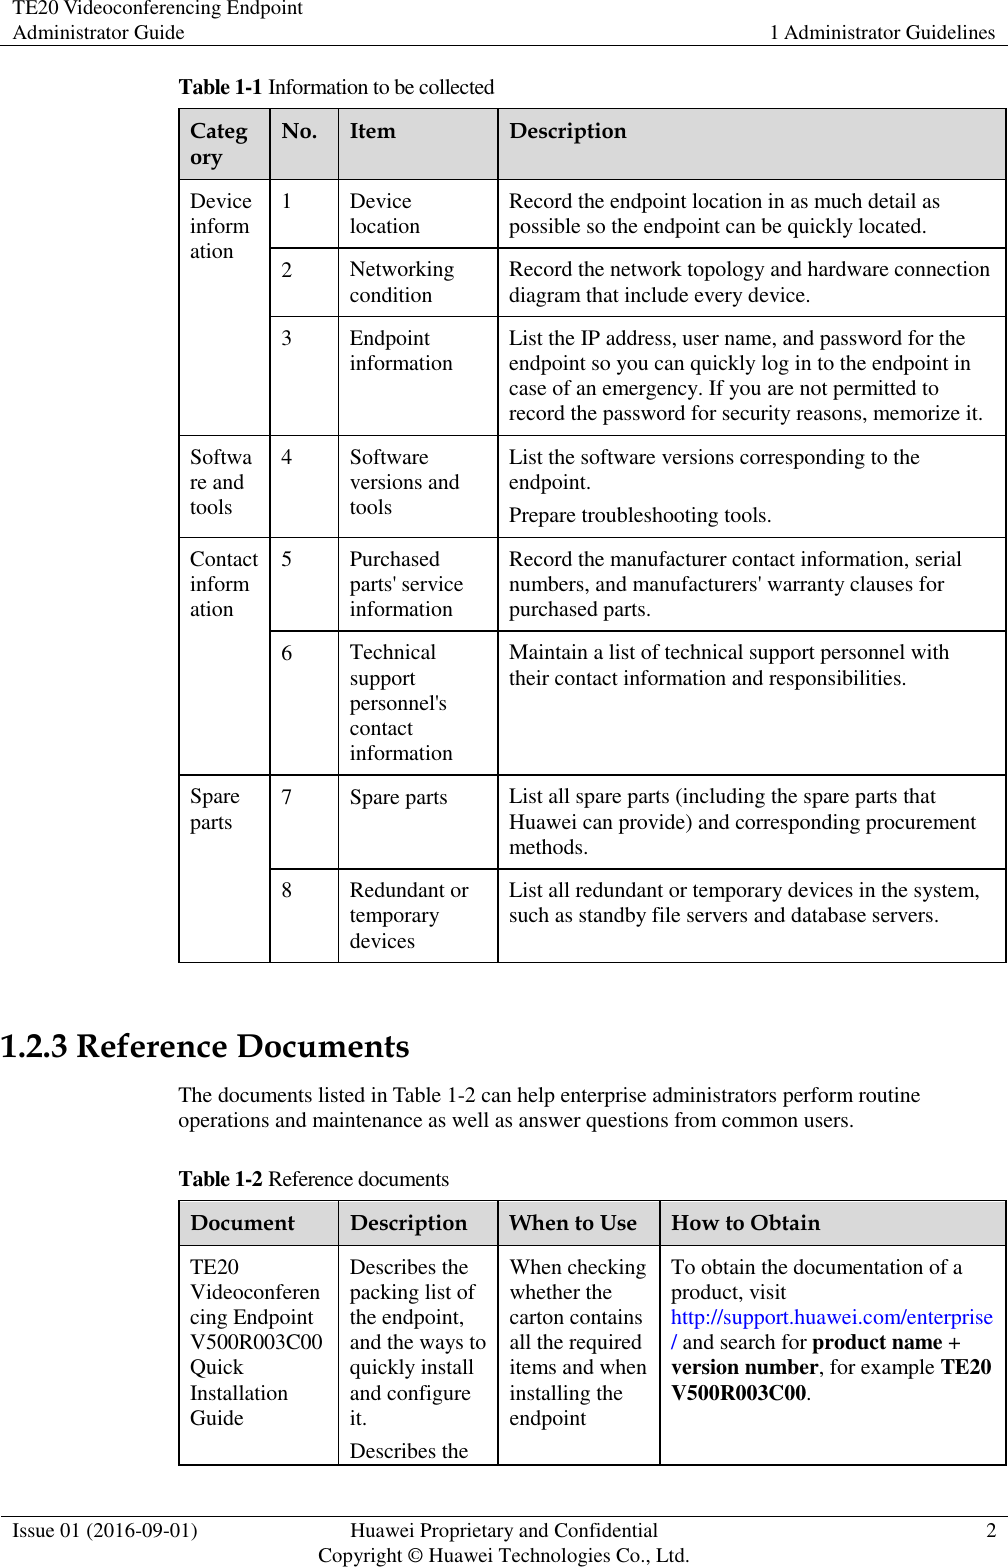 TE20 Videoconferencing Endpoint Administrator Guide 1 Administrator Guidelines  Issue 01 (2016-09-01) Huawei Proprietary and Confidential                                     Copyright © Huawei Technologies Co., Ltd. 2  Table 1-1 Information to be collected Category No. Item Description Device information 1 Device location Record the endpoint location in as much detail as possible so the endpoint can be quickly located. 2 Networking condition Record the network topology and hardware connection diagram that include every device. 3 Endpoint information List the IP address, user name, and password for the endpoint so you can quickly log in to the endpoint in case of an emergency. If you are not permitted to record the password for security reasons, memorize it. Software and tools 4 Software versions and tools List the software versions corresponding to the endpoint. Prepare troubleshooting tools. Contact information 5 Purchased parts&apos; service information Record the manufacturer contact information, serial numbers, and manufacturers&apos; warranty clauses for purchased parts. 6 Technical support personnel&apos;s contact information Maintain a list of technical support personnel with their contact information and responsibilities. Spare parts 7 Spare parts List all spare parts (including the spare parts that Huawei can provide) and corresponding procurement methods. 8 Redundant or temporary devices List all redundant or temporary devices in the system, such as standby file servers and database servers.  1.2.3 Reference Documents The documents listed in Table 1-2 can help enterprise administrators perform routine operations and maintenance as well as answer questions from common users. Table 1-2 Reference documents Document Description When to Use How to Obtain TE20 Videoconferencing Endpoint V500R003C00 Quick Installation Guide Describes the packing list of the endpoint, and the ways to quickly install and configure it. Describes the When checking whether the carton contains all the required items and when installing the endpoint To obtain the documentation of a product, visit http://support.huawei.com/enterprise/ and search for product name + version number, for example TE20 V500R003C00. 